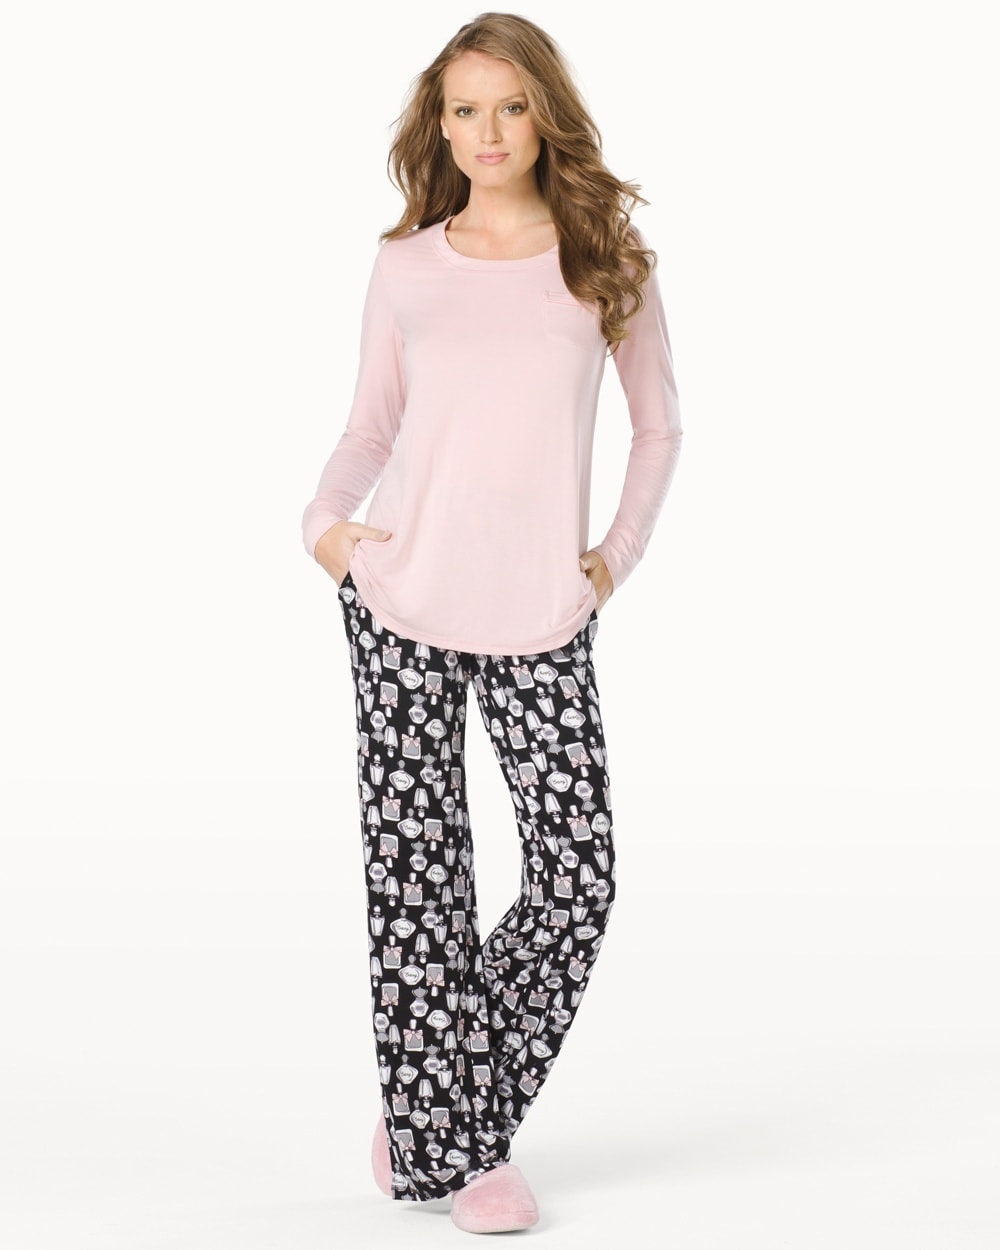 Embraceable Cool Nights Long Sleeve Pajama Pant Set Enticing Pink Romance